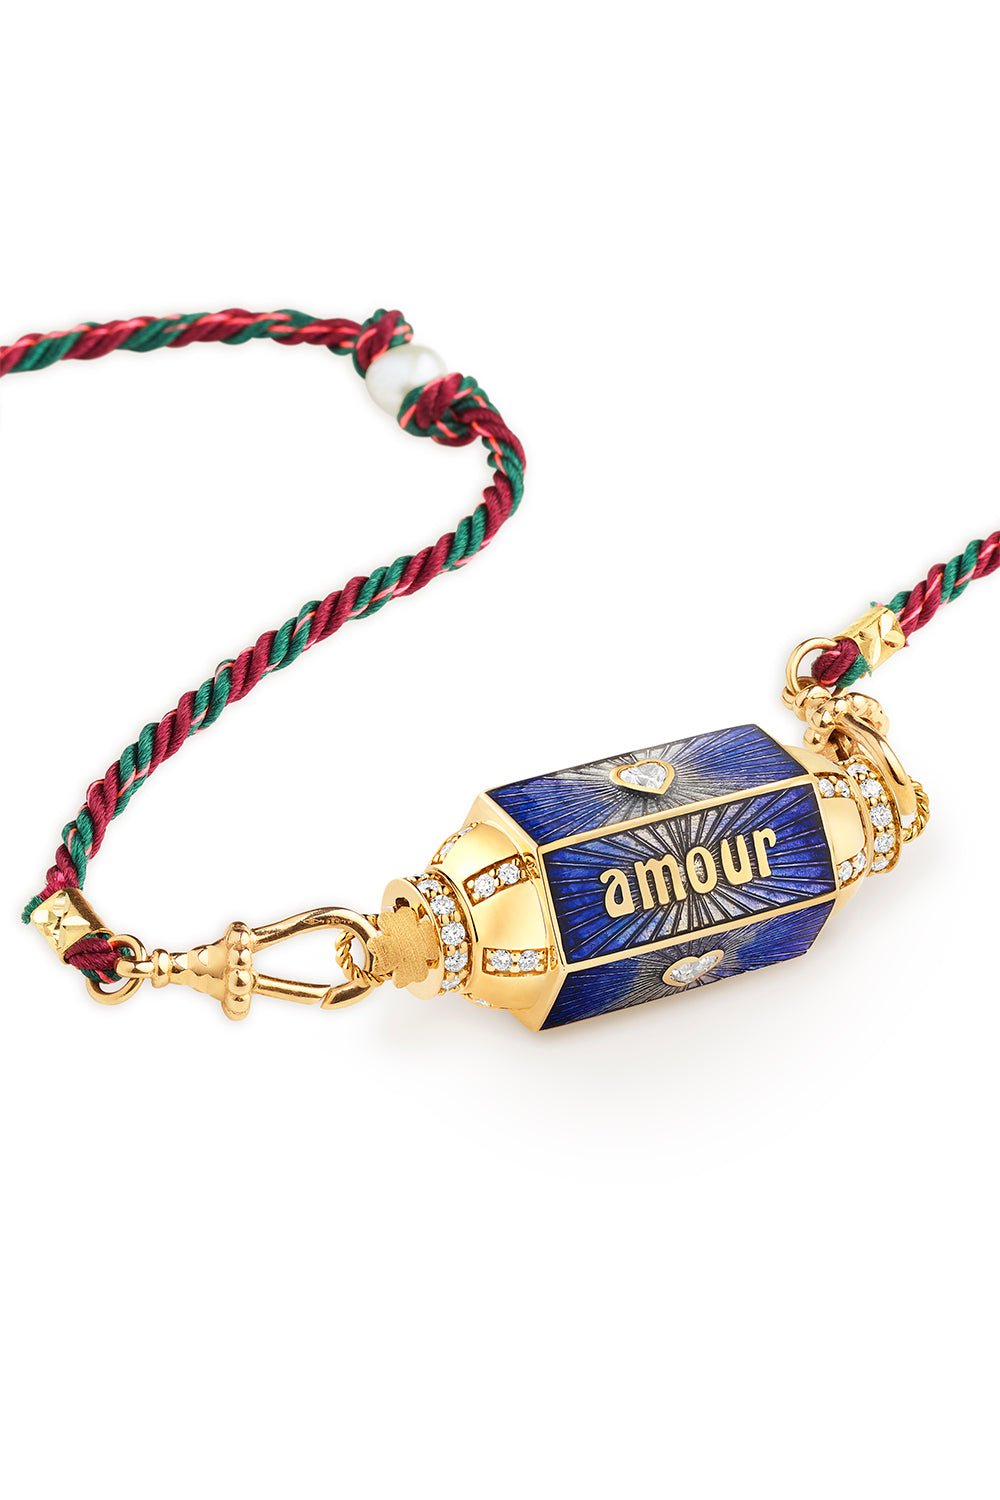 MARIE LICHTENBERG-Amour Toujours Locket Necklace-YELLOW GOLD